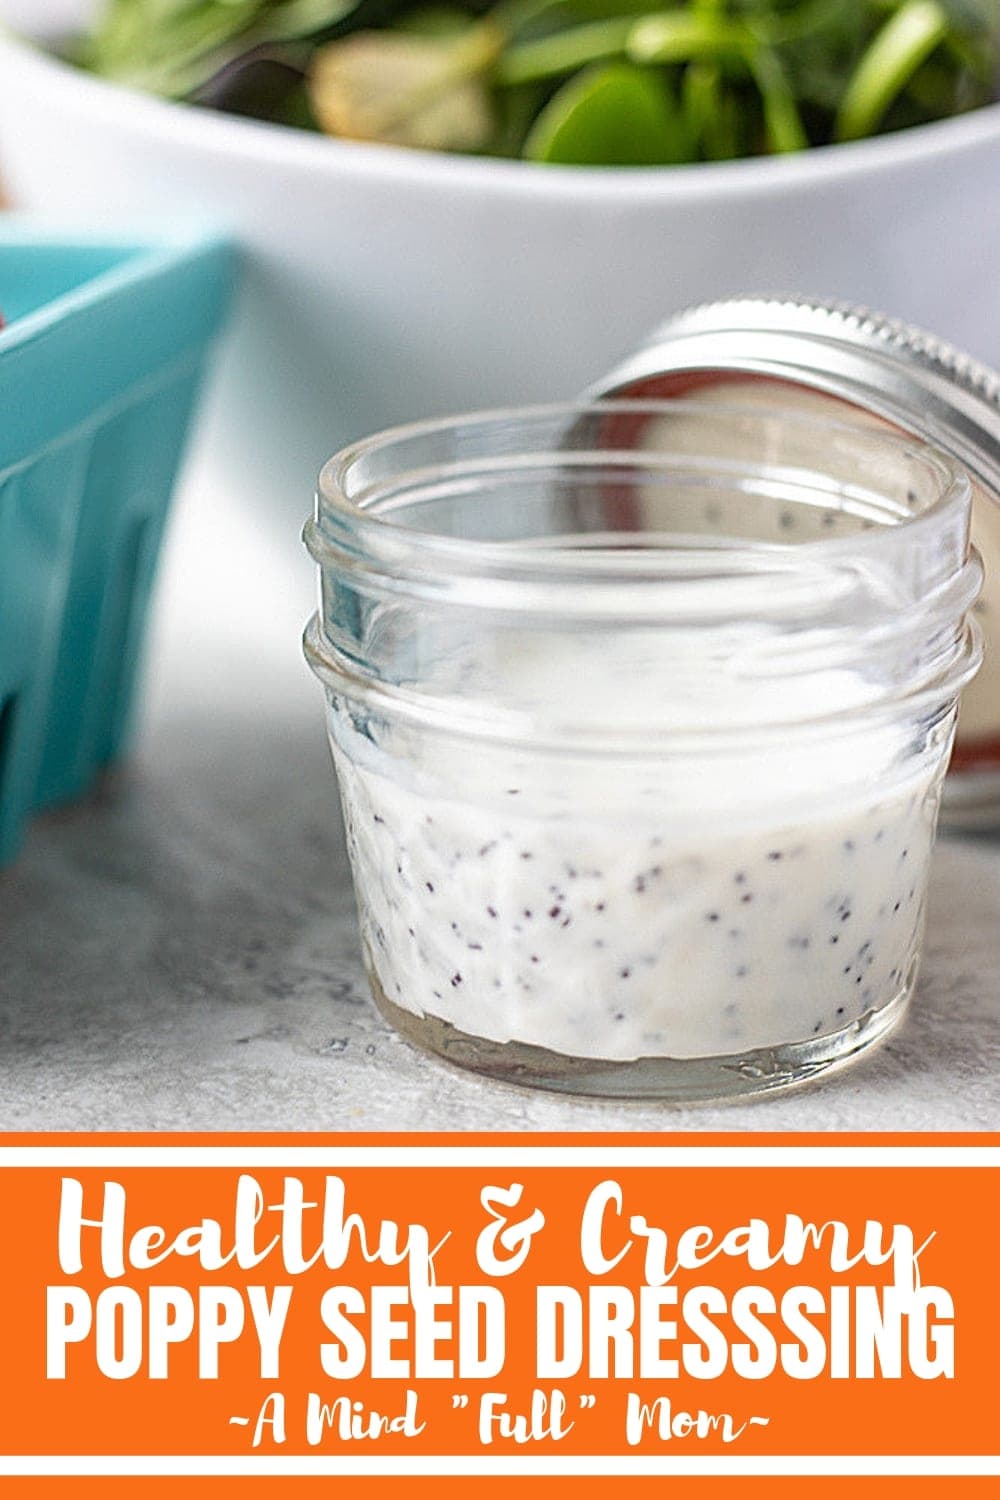 Oil-free and naturally sweetened, this recipe for Creamy Poppy Seed Dressing is sweet, tangy, and will liven up your salads with flavor--guilt-free!